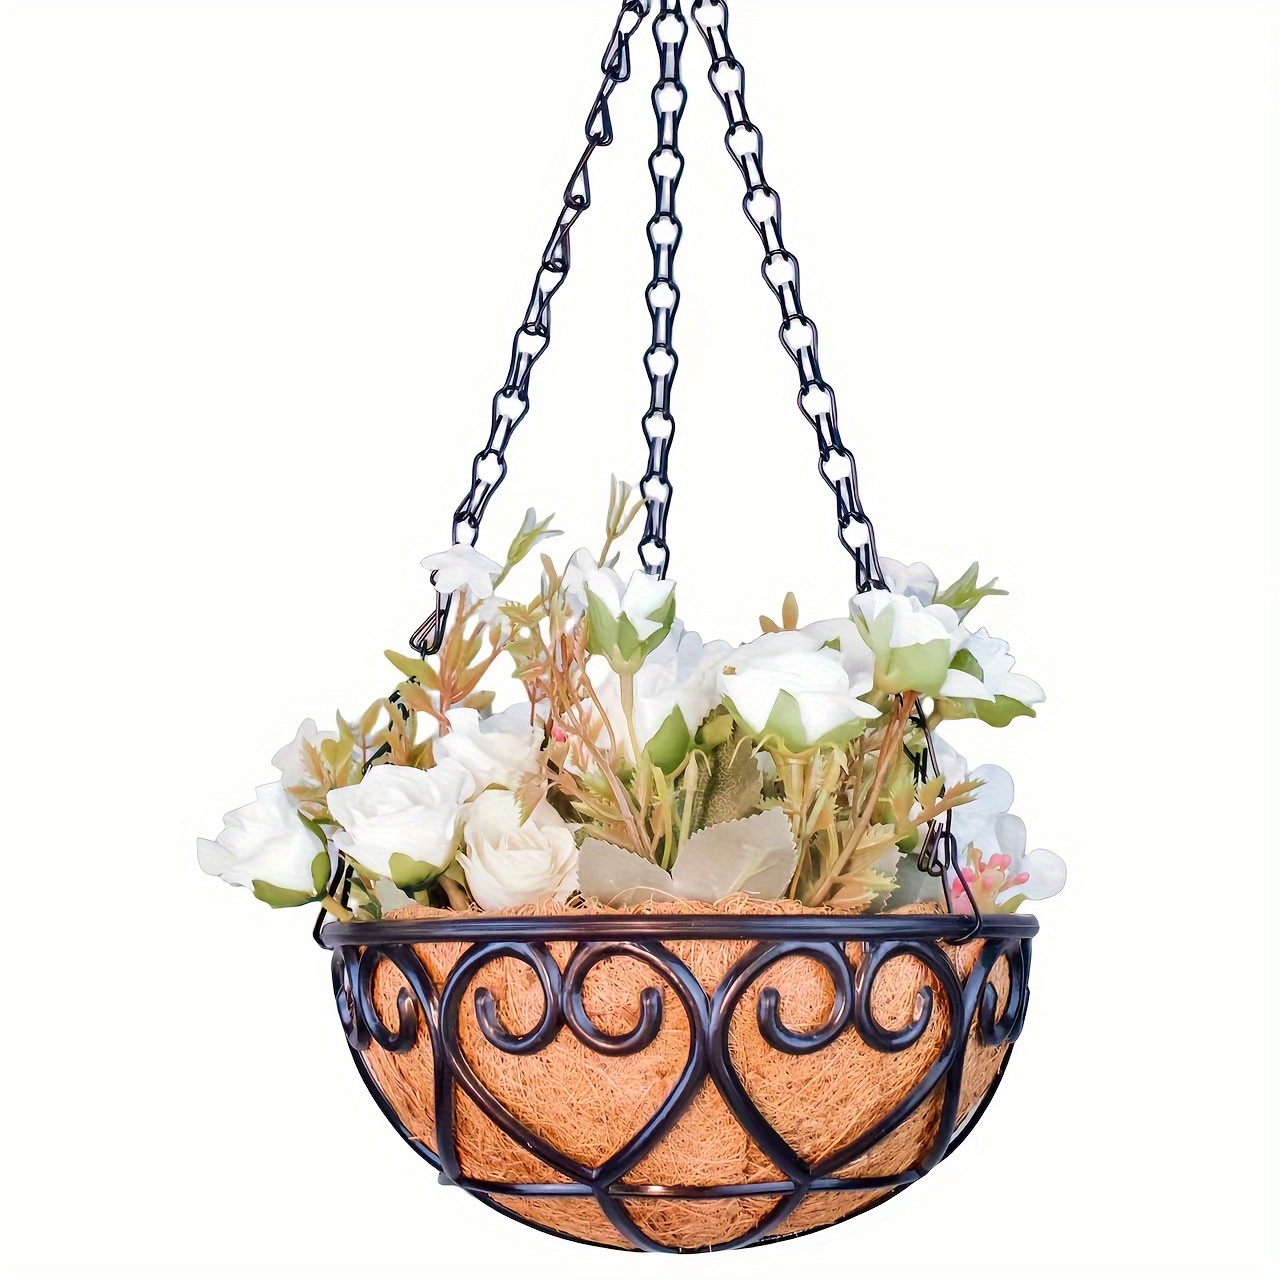 

1pc, Large Round Iron Art Planter With Coir Liner, 11.8in Hanging Basket For Indoor And Outdoor Plants, Decorative Scrollwork Design, Heavy-duty Chain And Hook Included